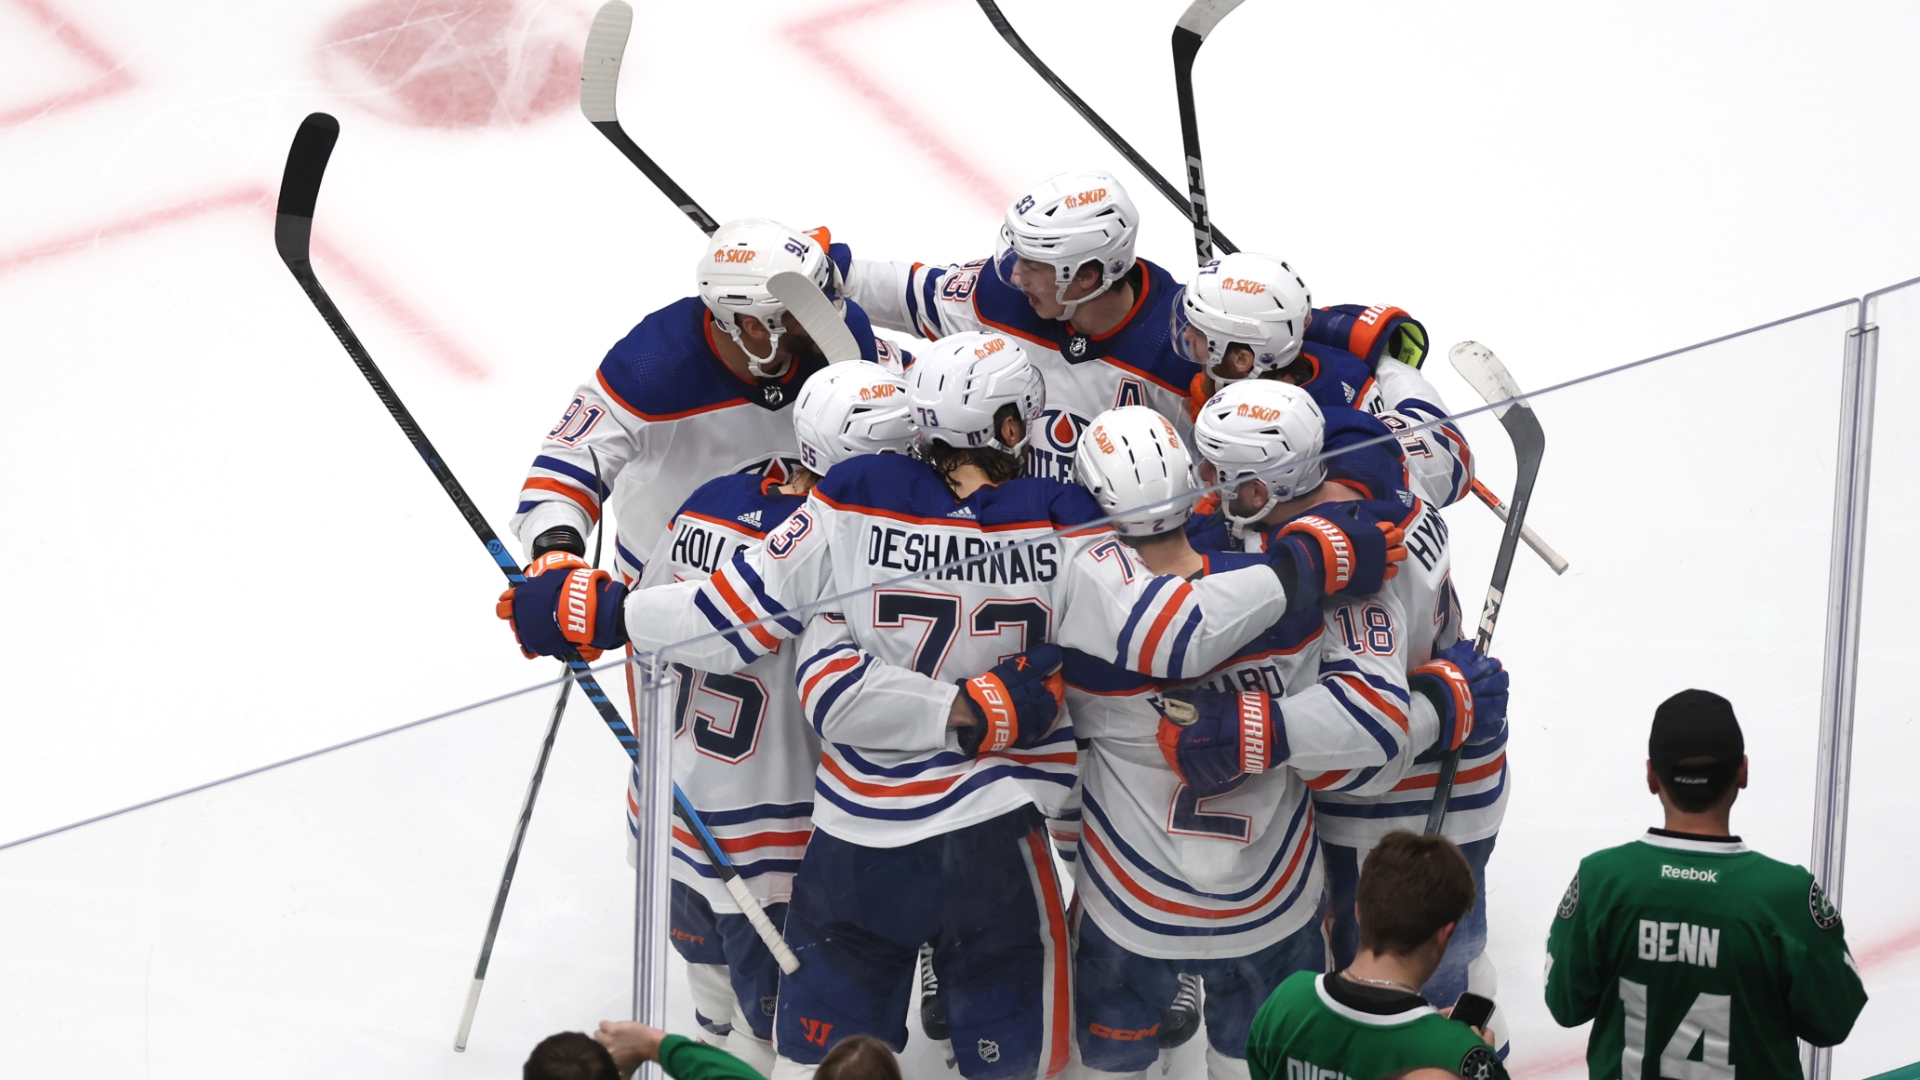 Connor McDavid scores in 2OT as Oilers defeat Stars in Game 1